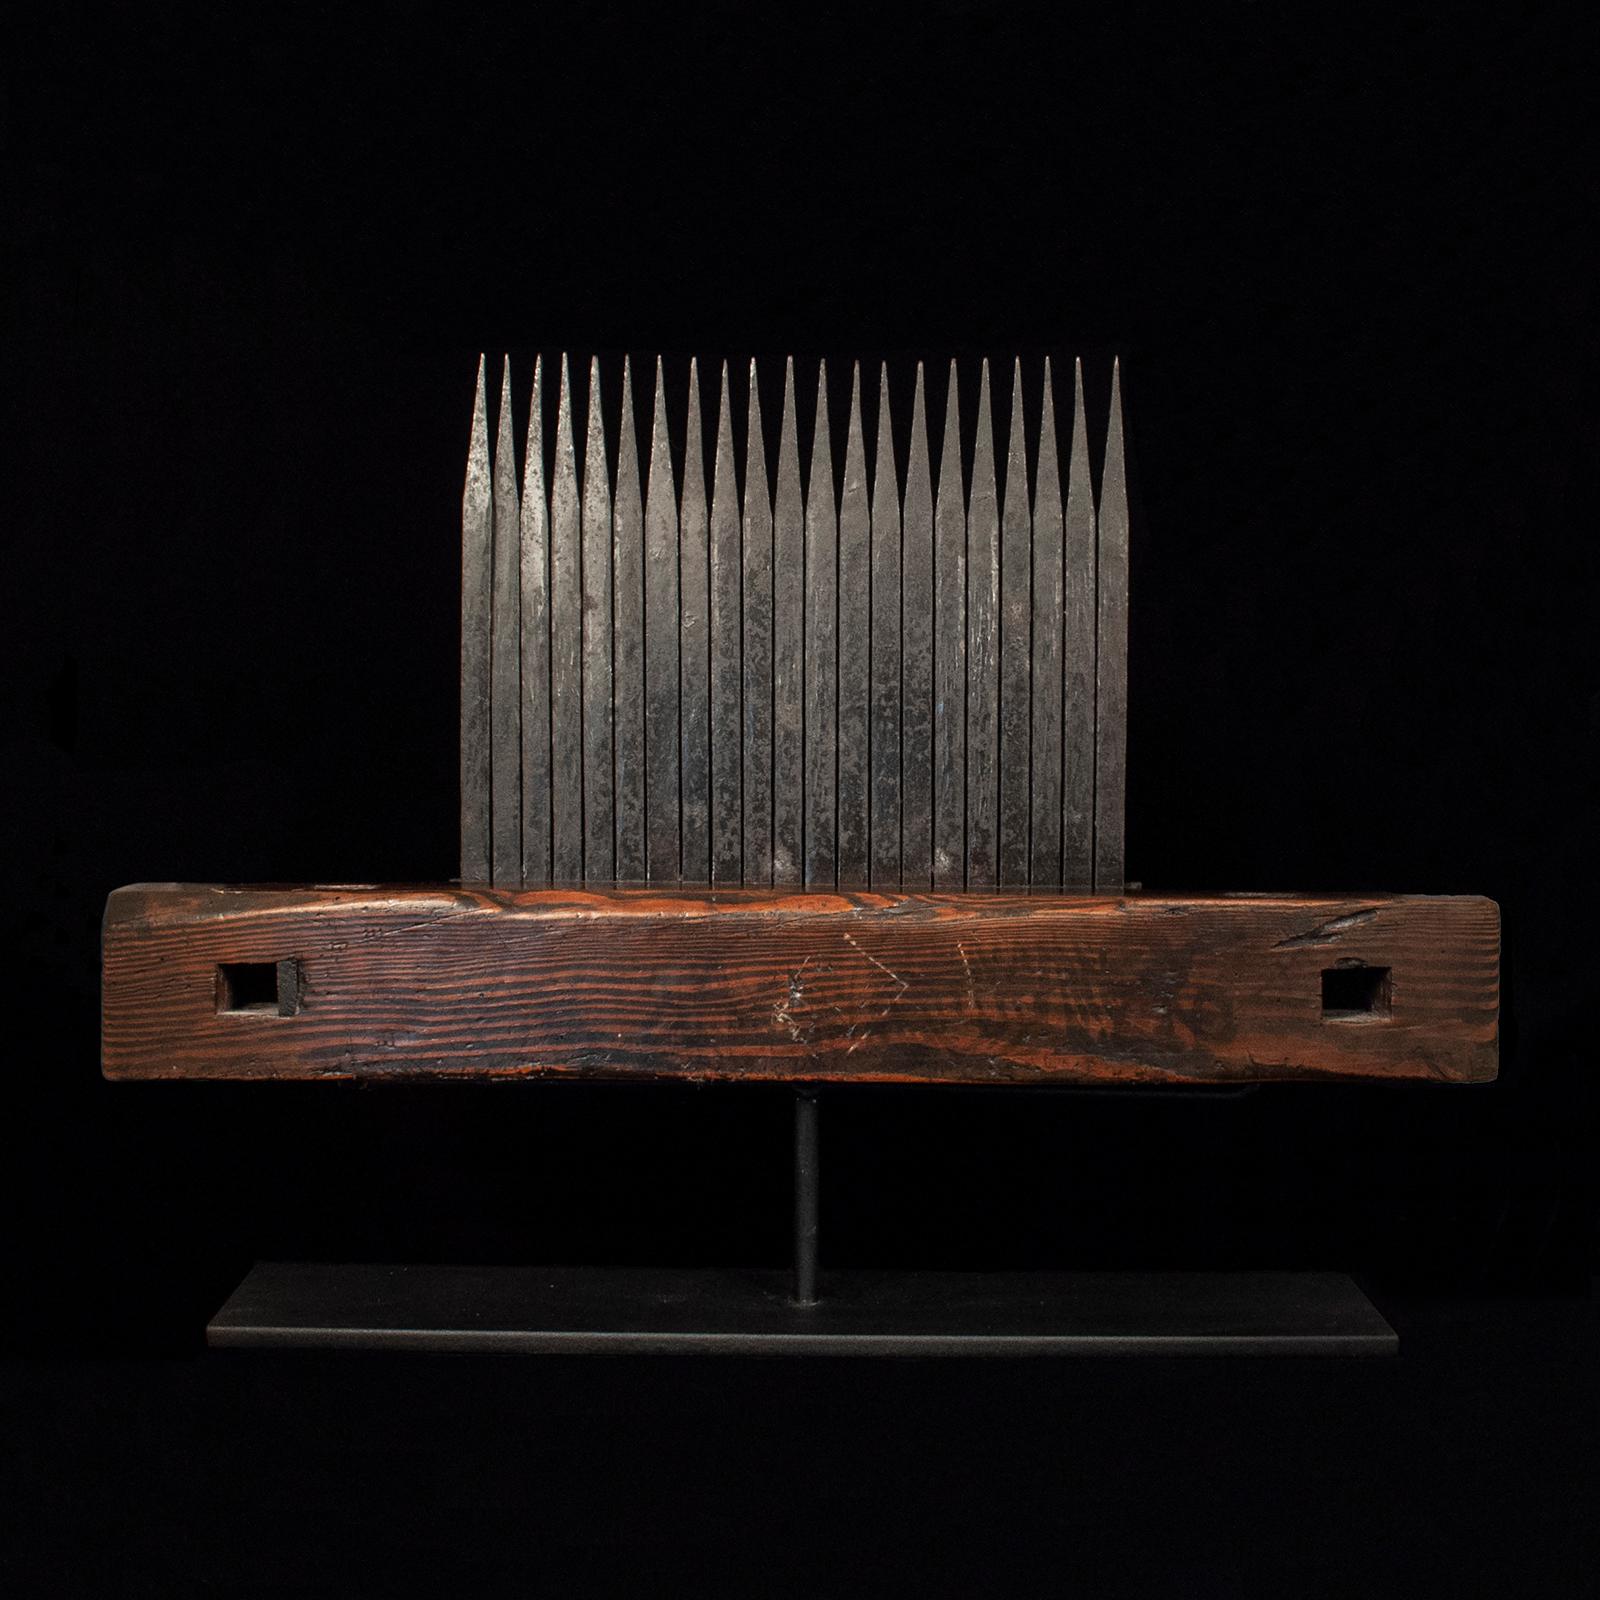 A rare large Meiji Period (1868-1912) comb used for threshing rice straw, with 21 hand forged iron tines mounted on hard wood. Displays beautifully on a custom metal base. 12.25